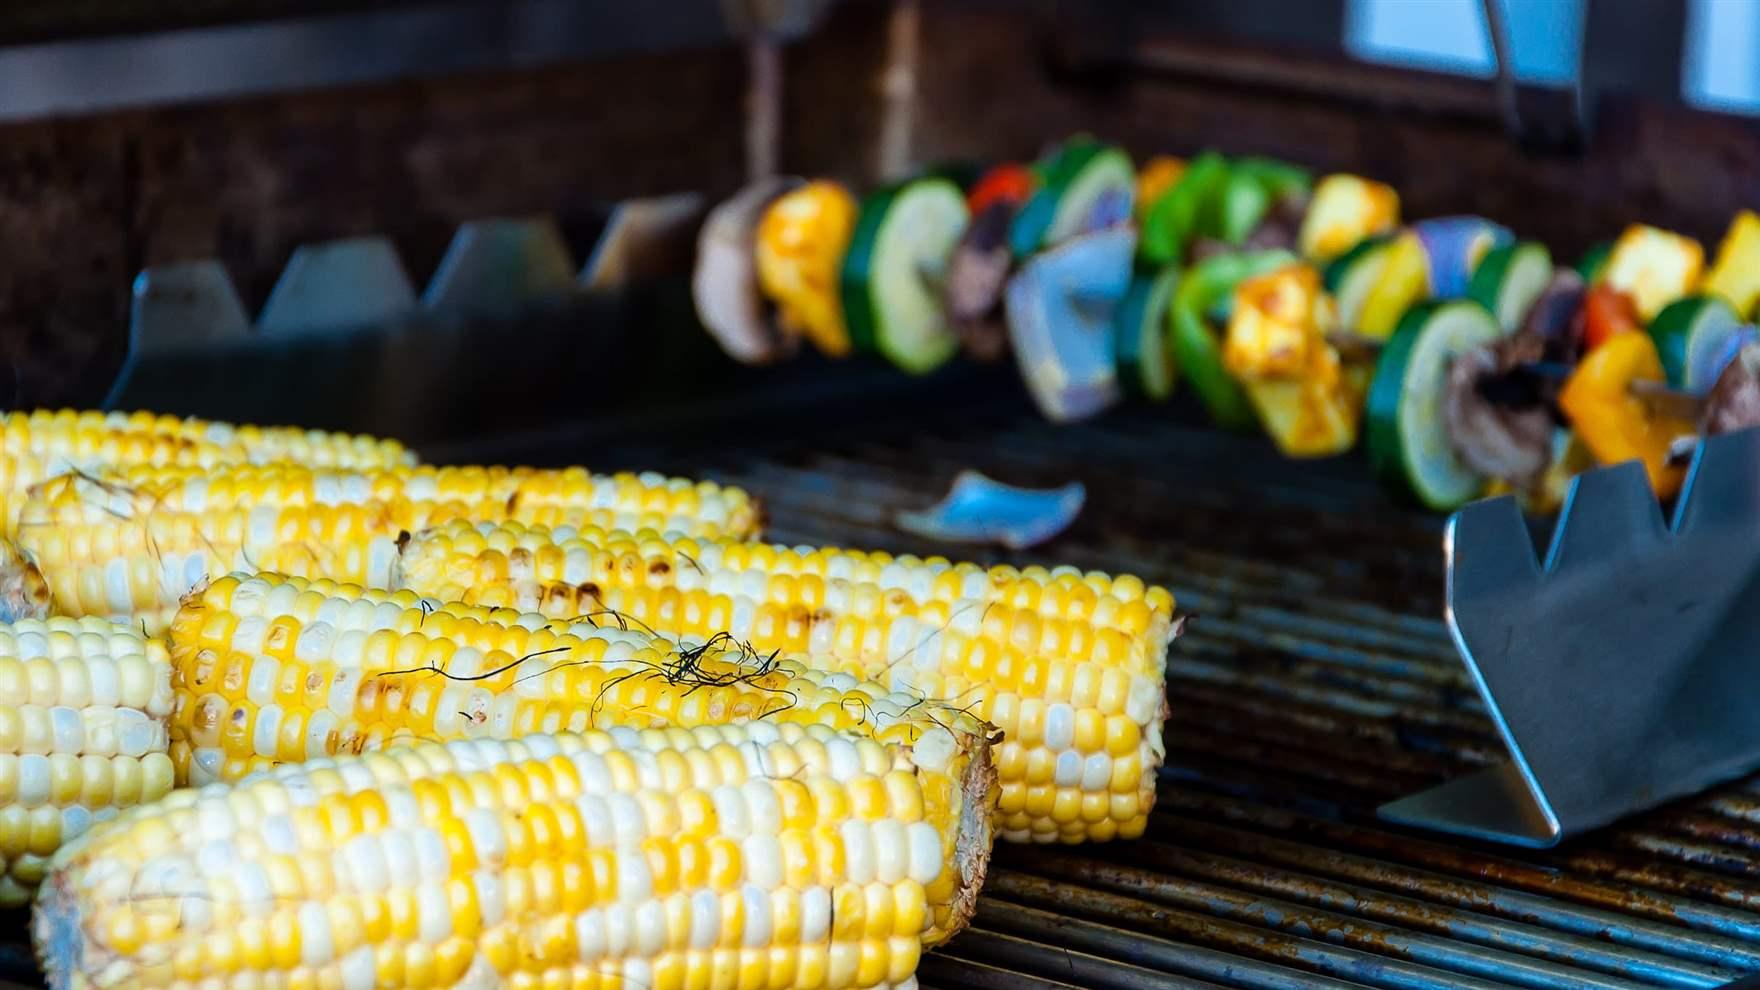 An image of summer corn and zucchini skewers on the grill.